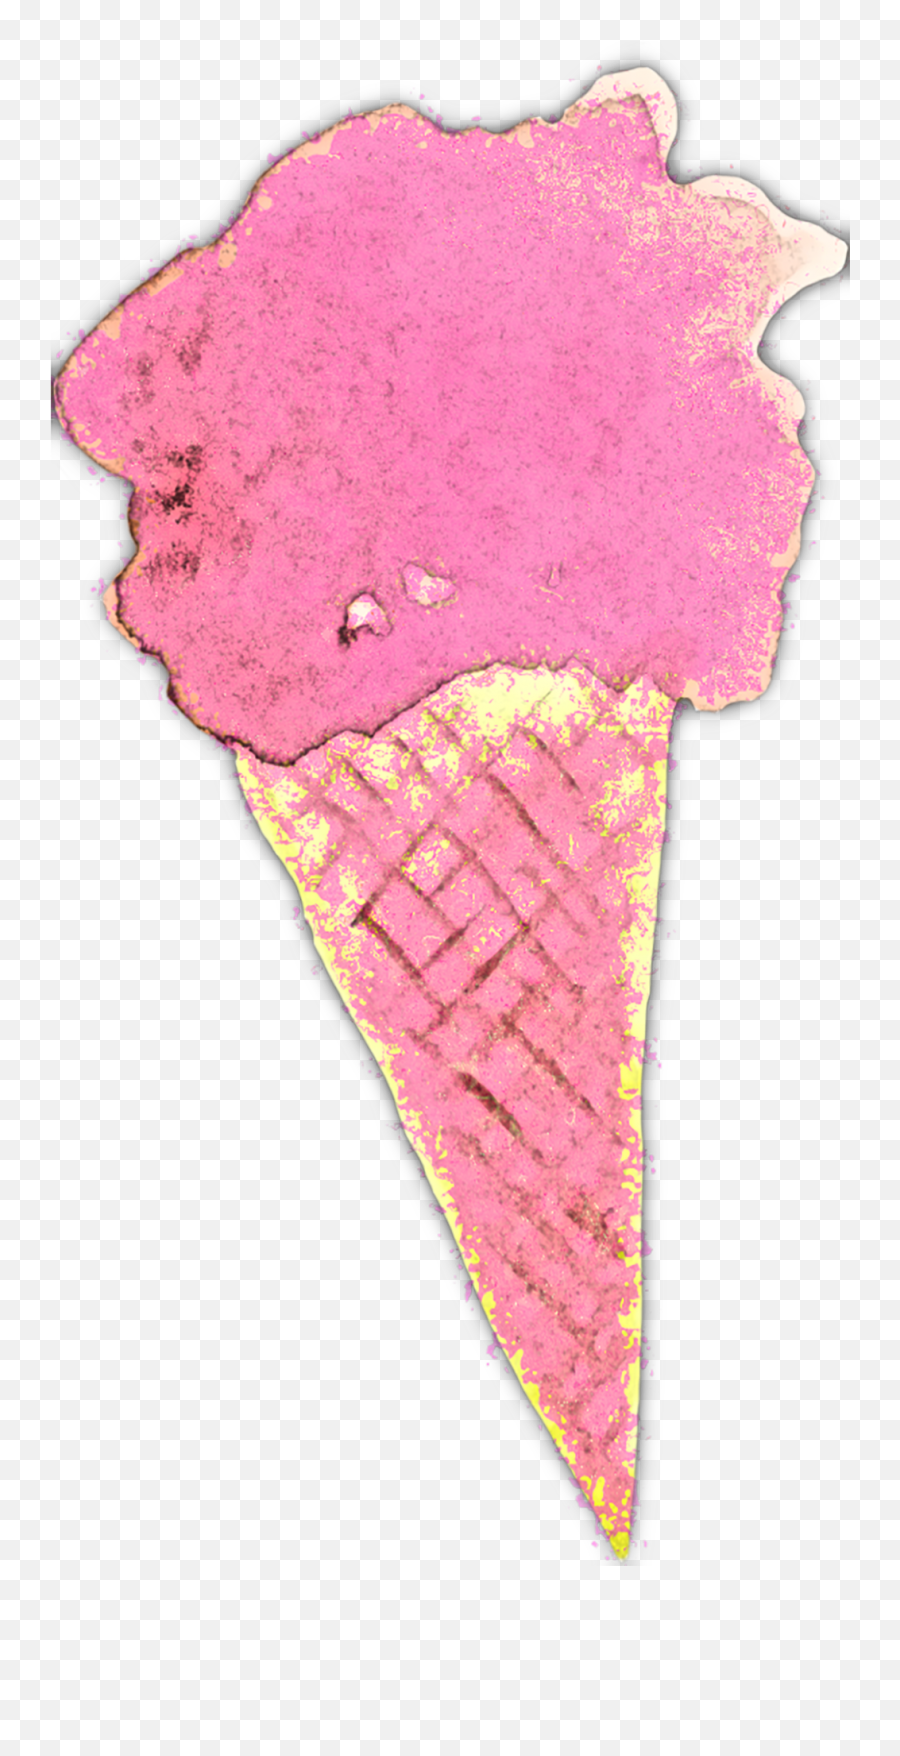 Abstract Ice Cream Cone Png Free Stock - Cone,Cone Png